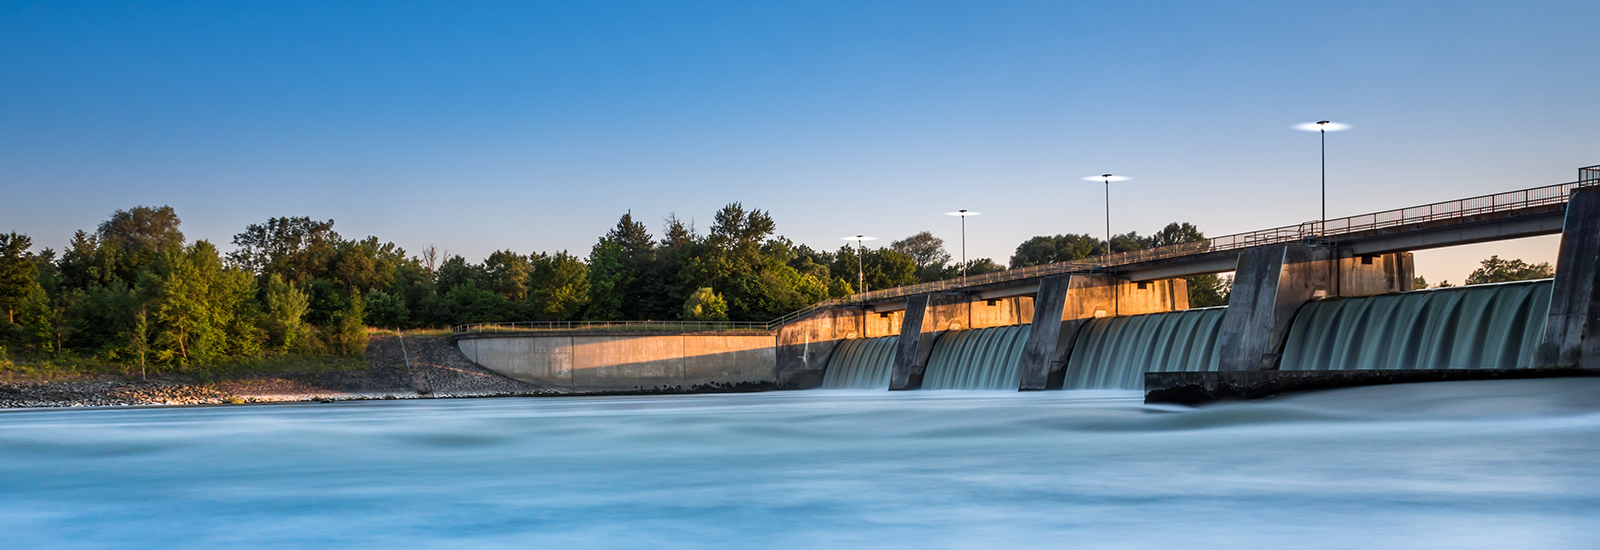 Image of hydroelectric dam.